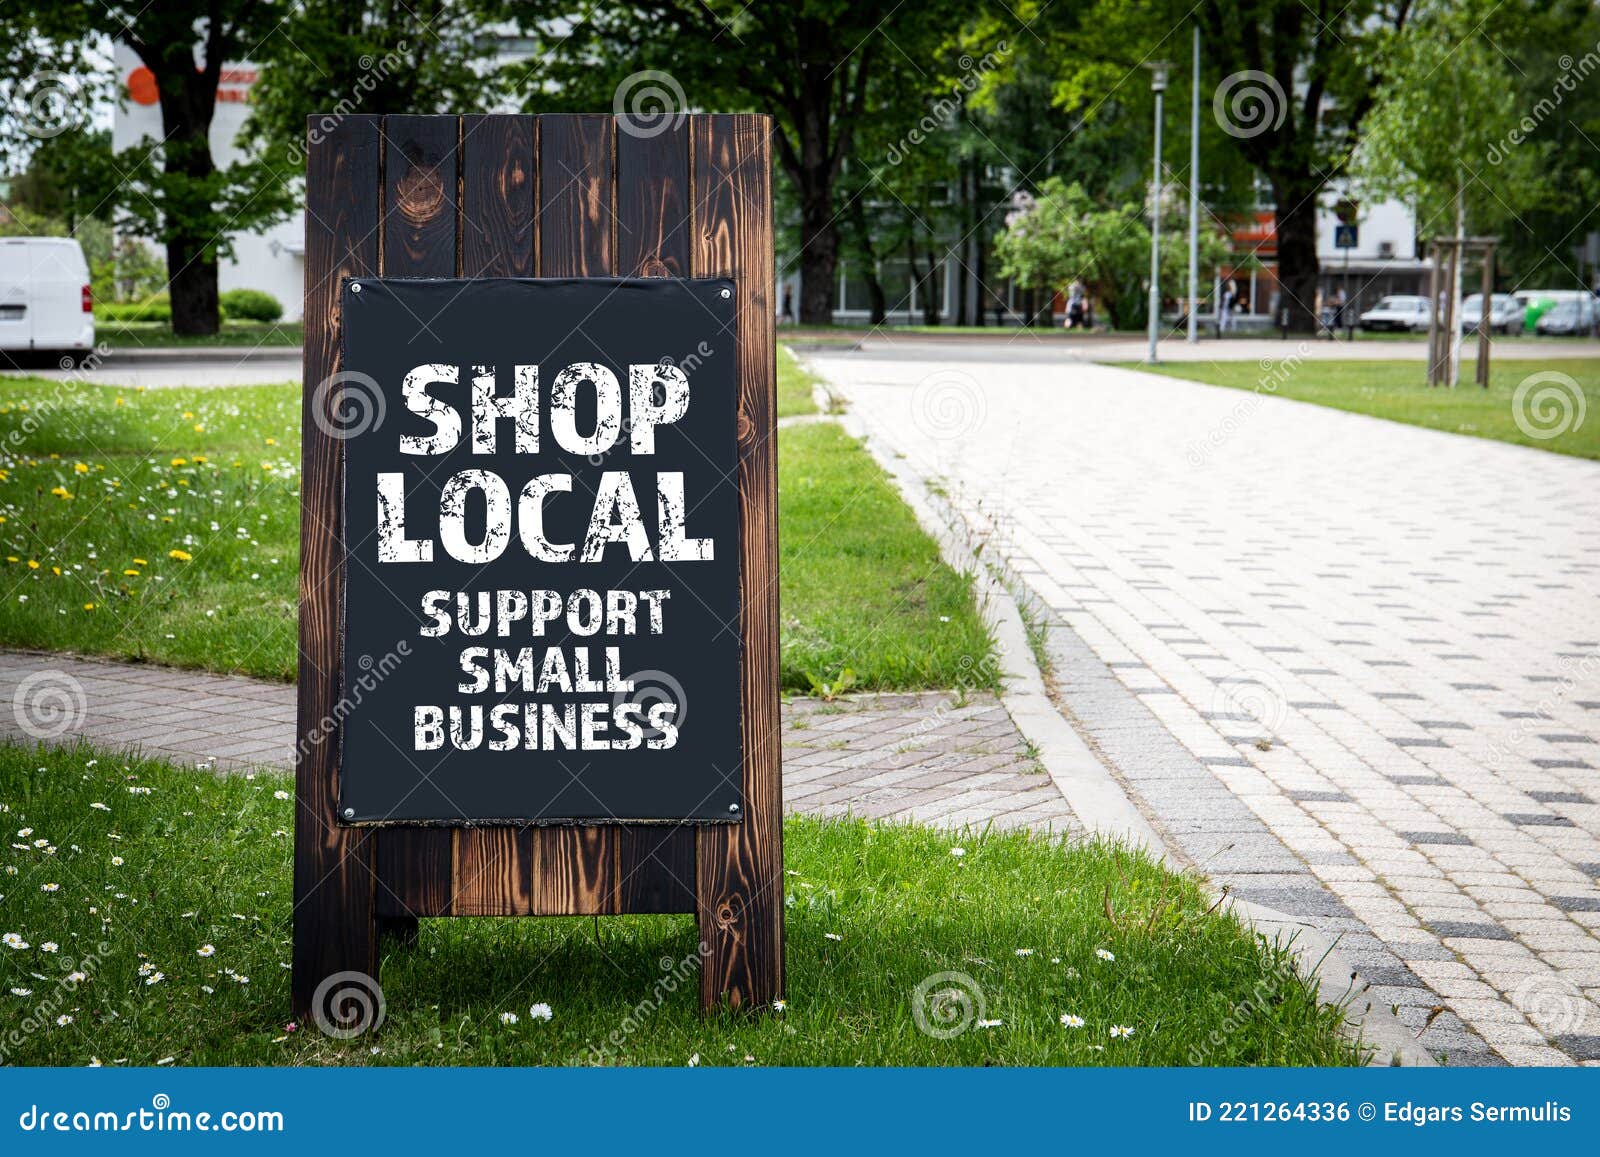 shop local. support small business. wooden billboard on the street, sunny day